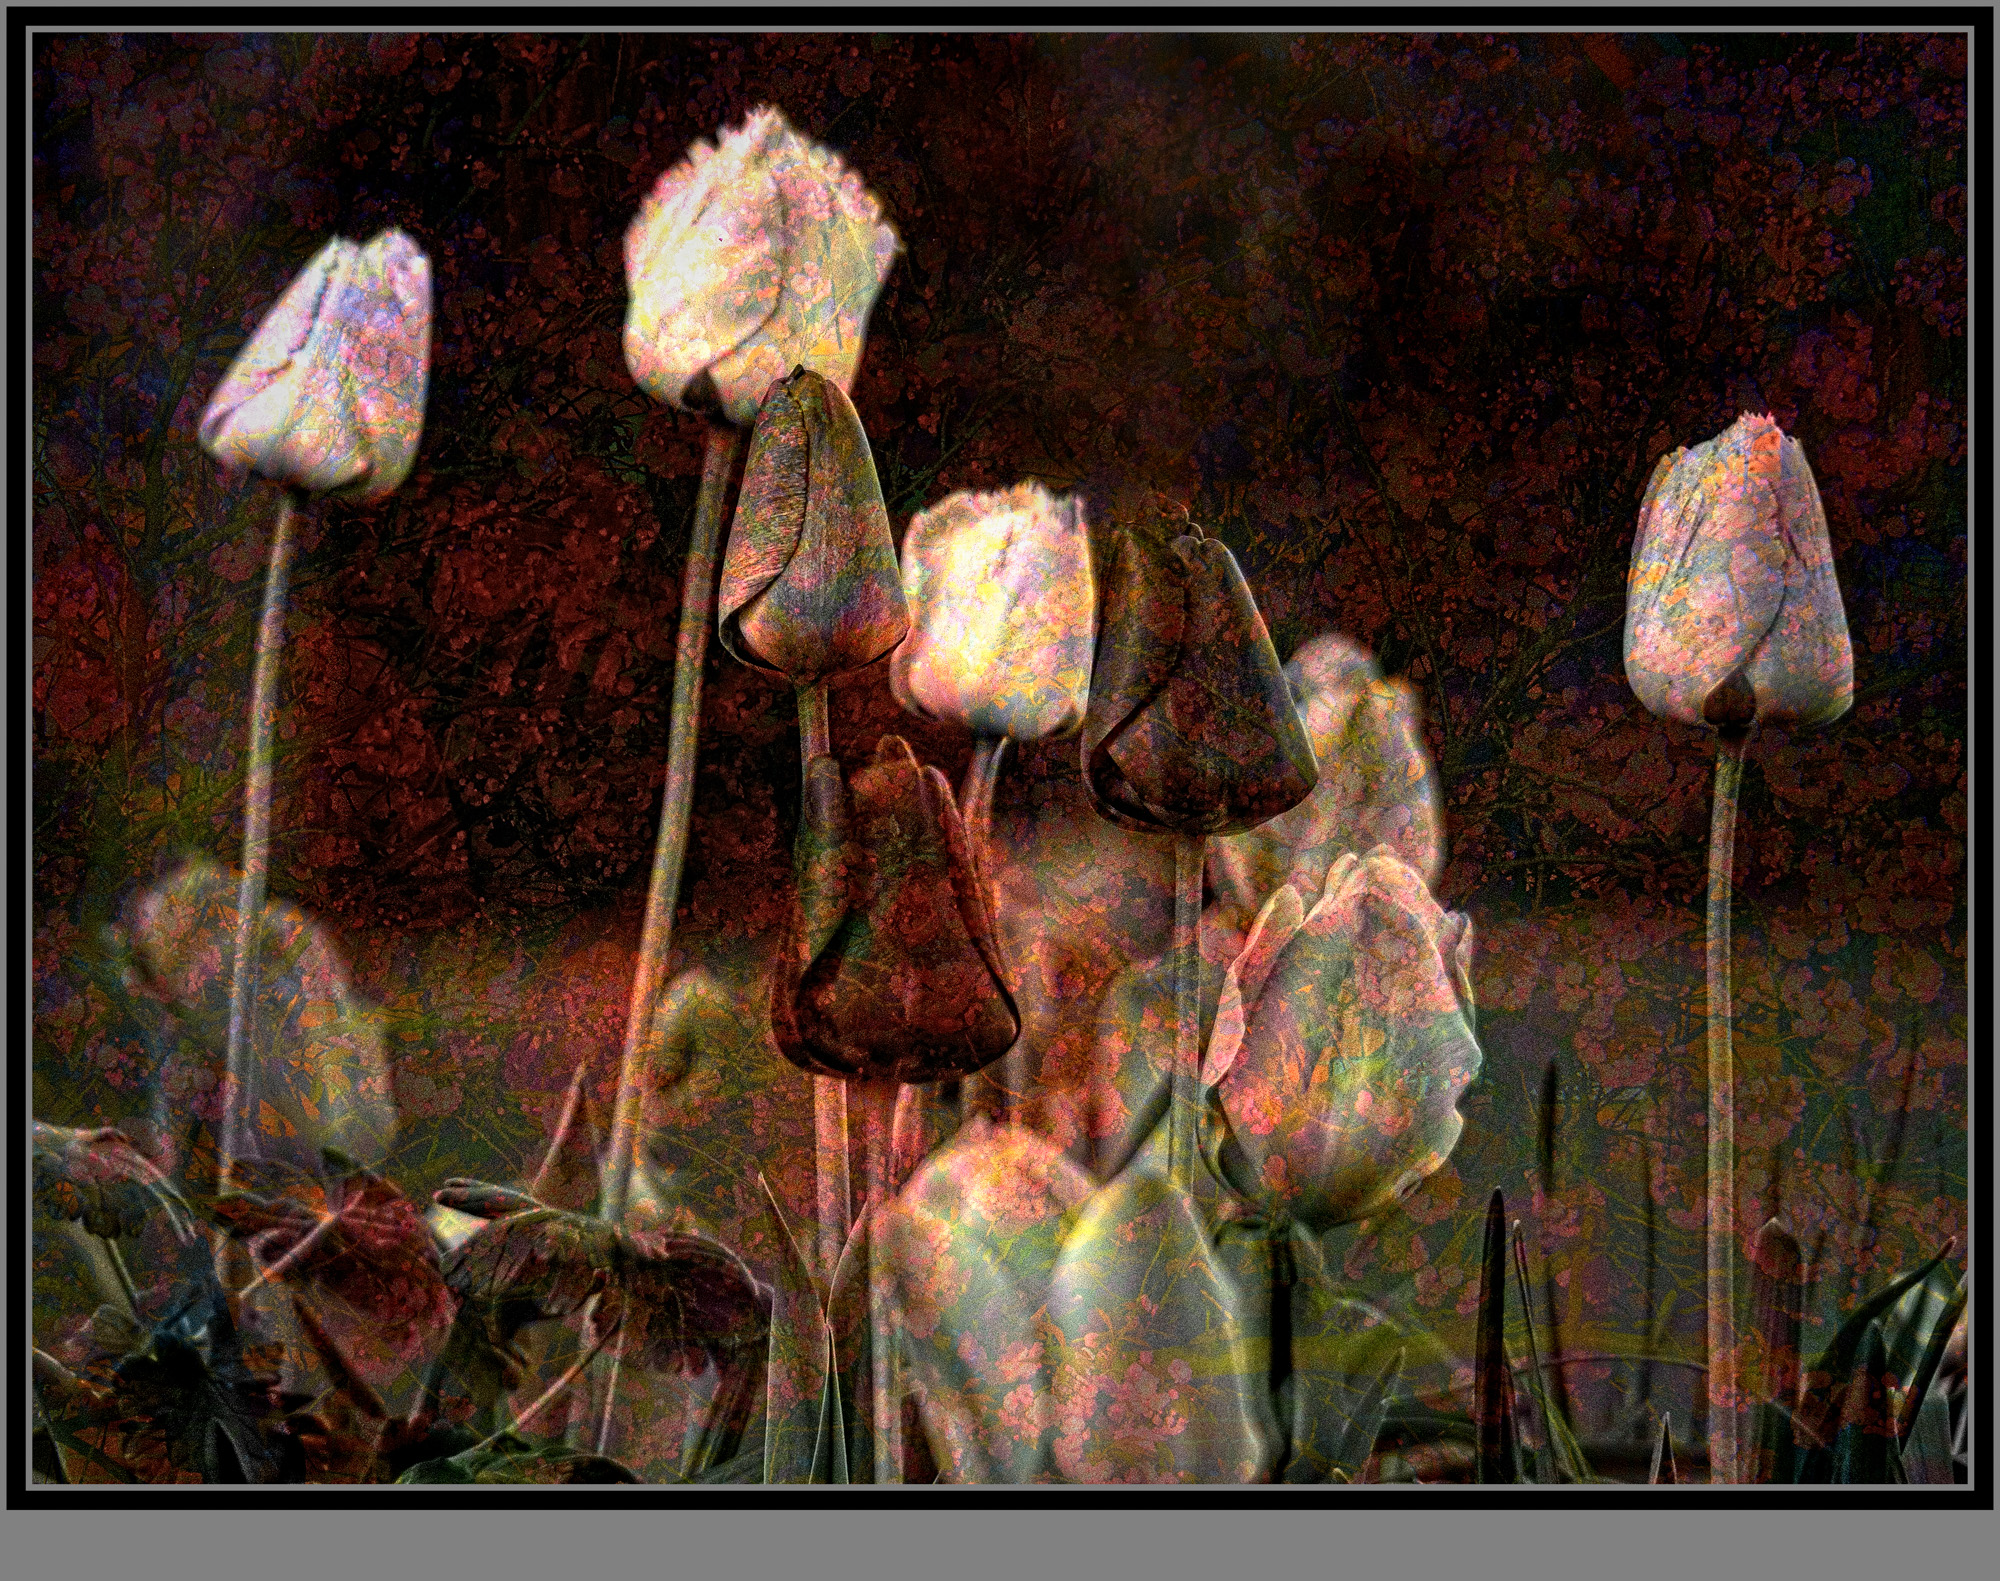 Mad about tulips ©Stewart Wall 2020